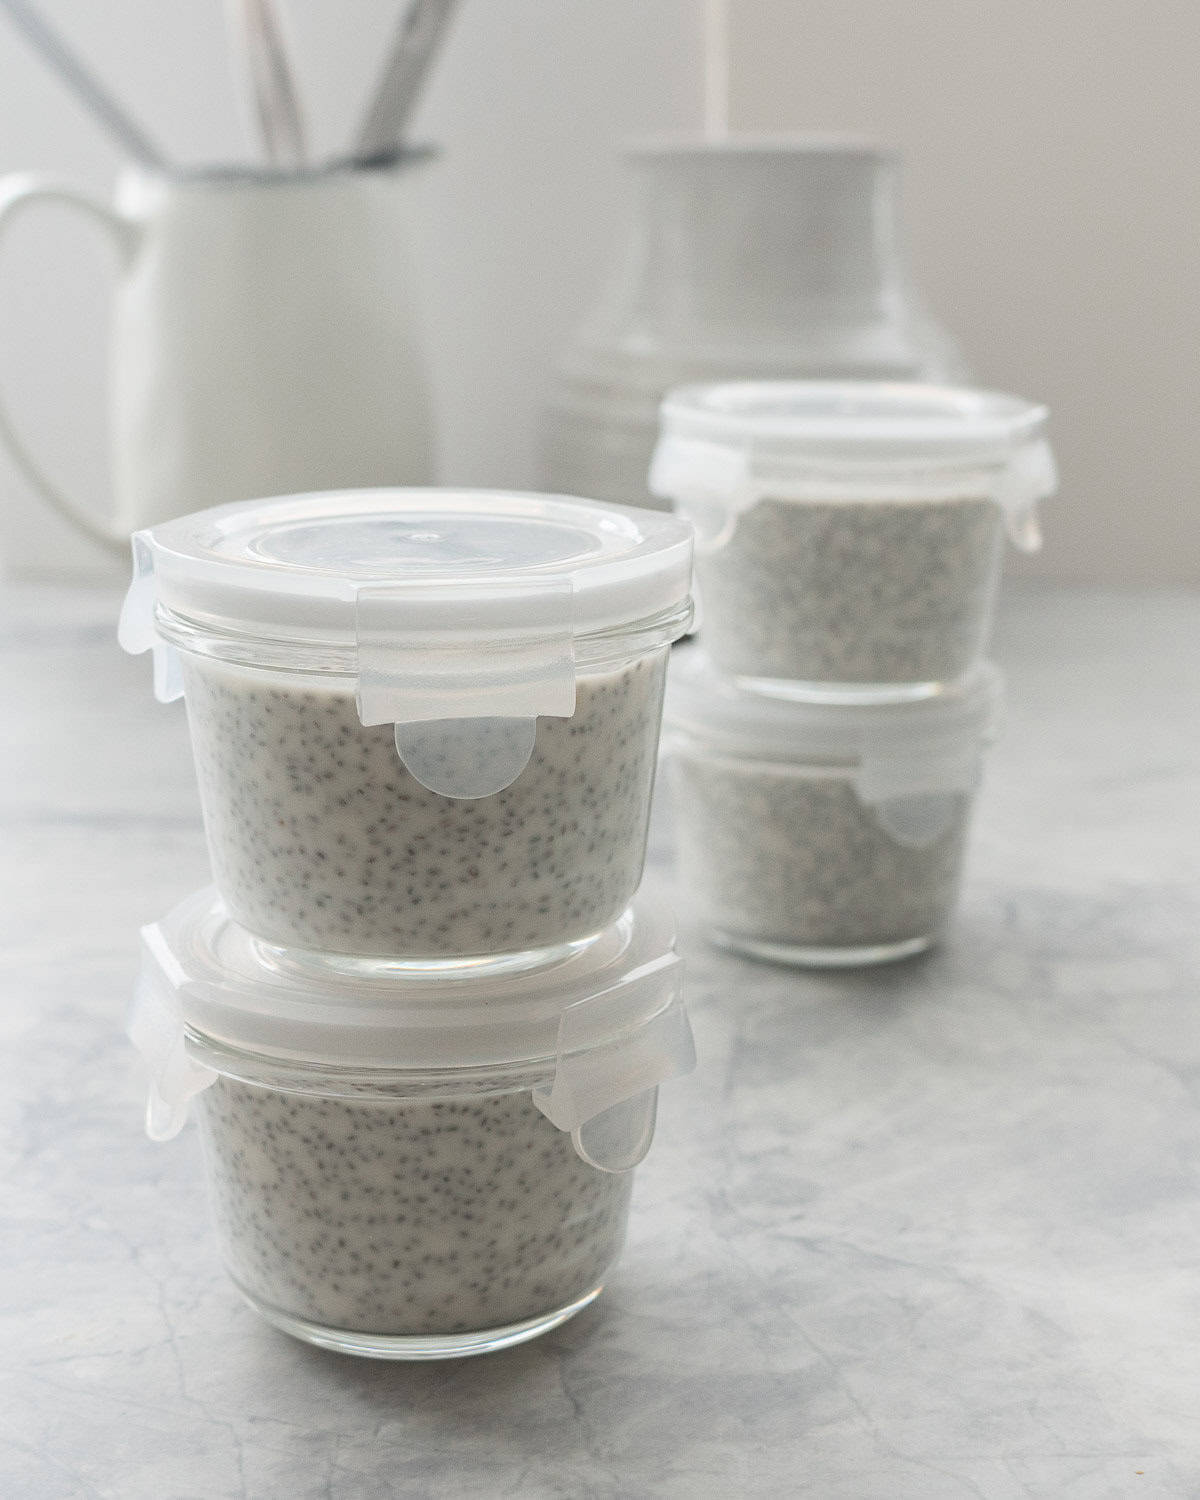 2 stacks of 2 containers filled with coconut chia pudding with lids on.